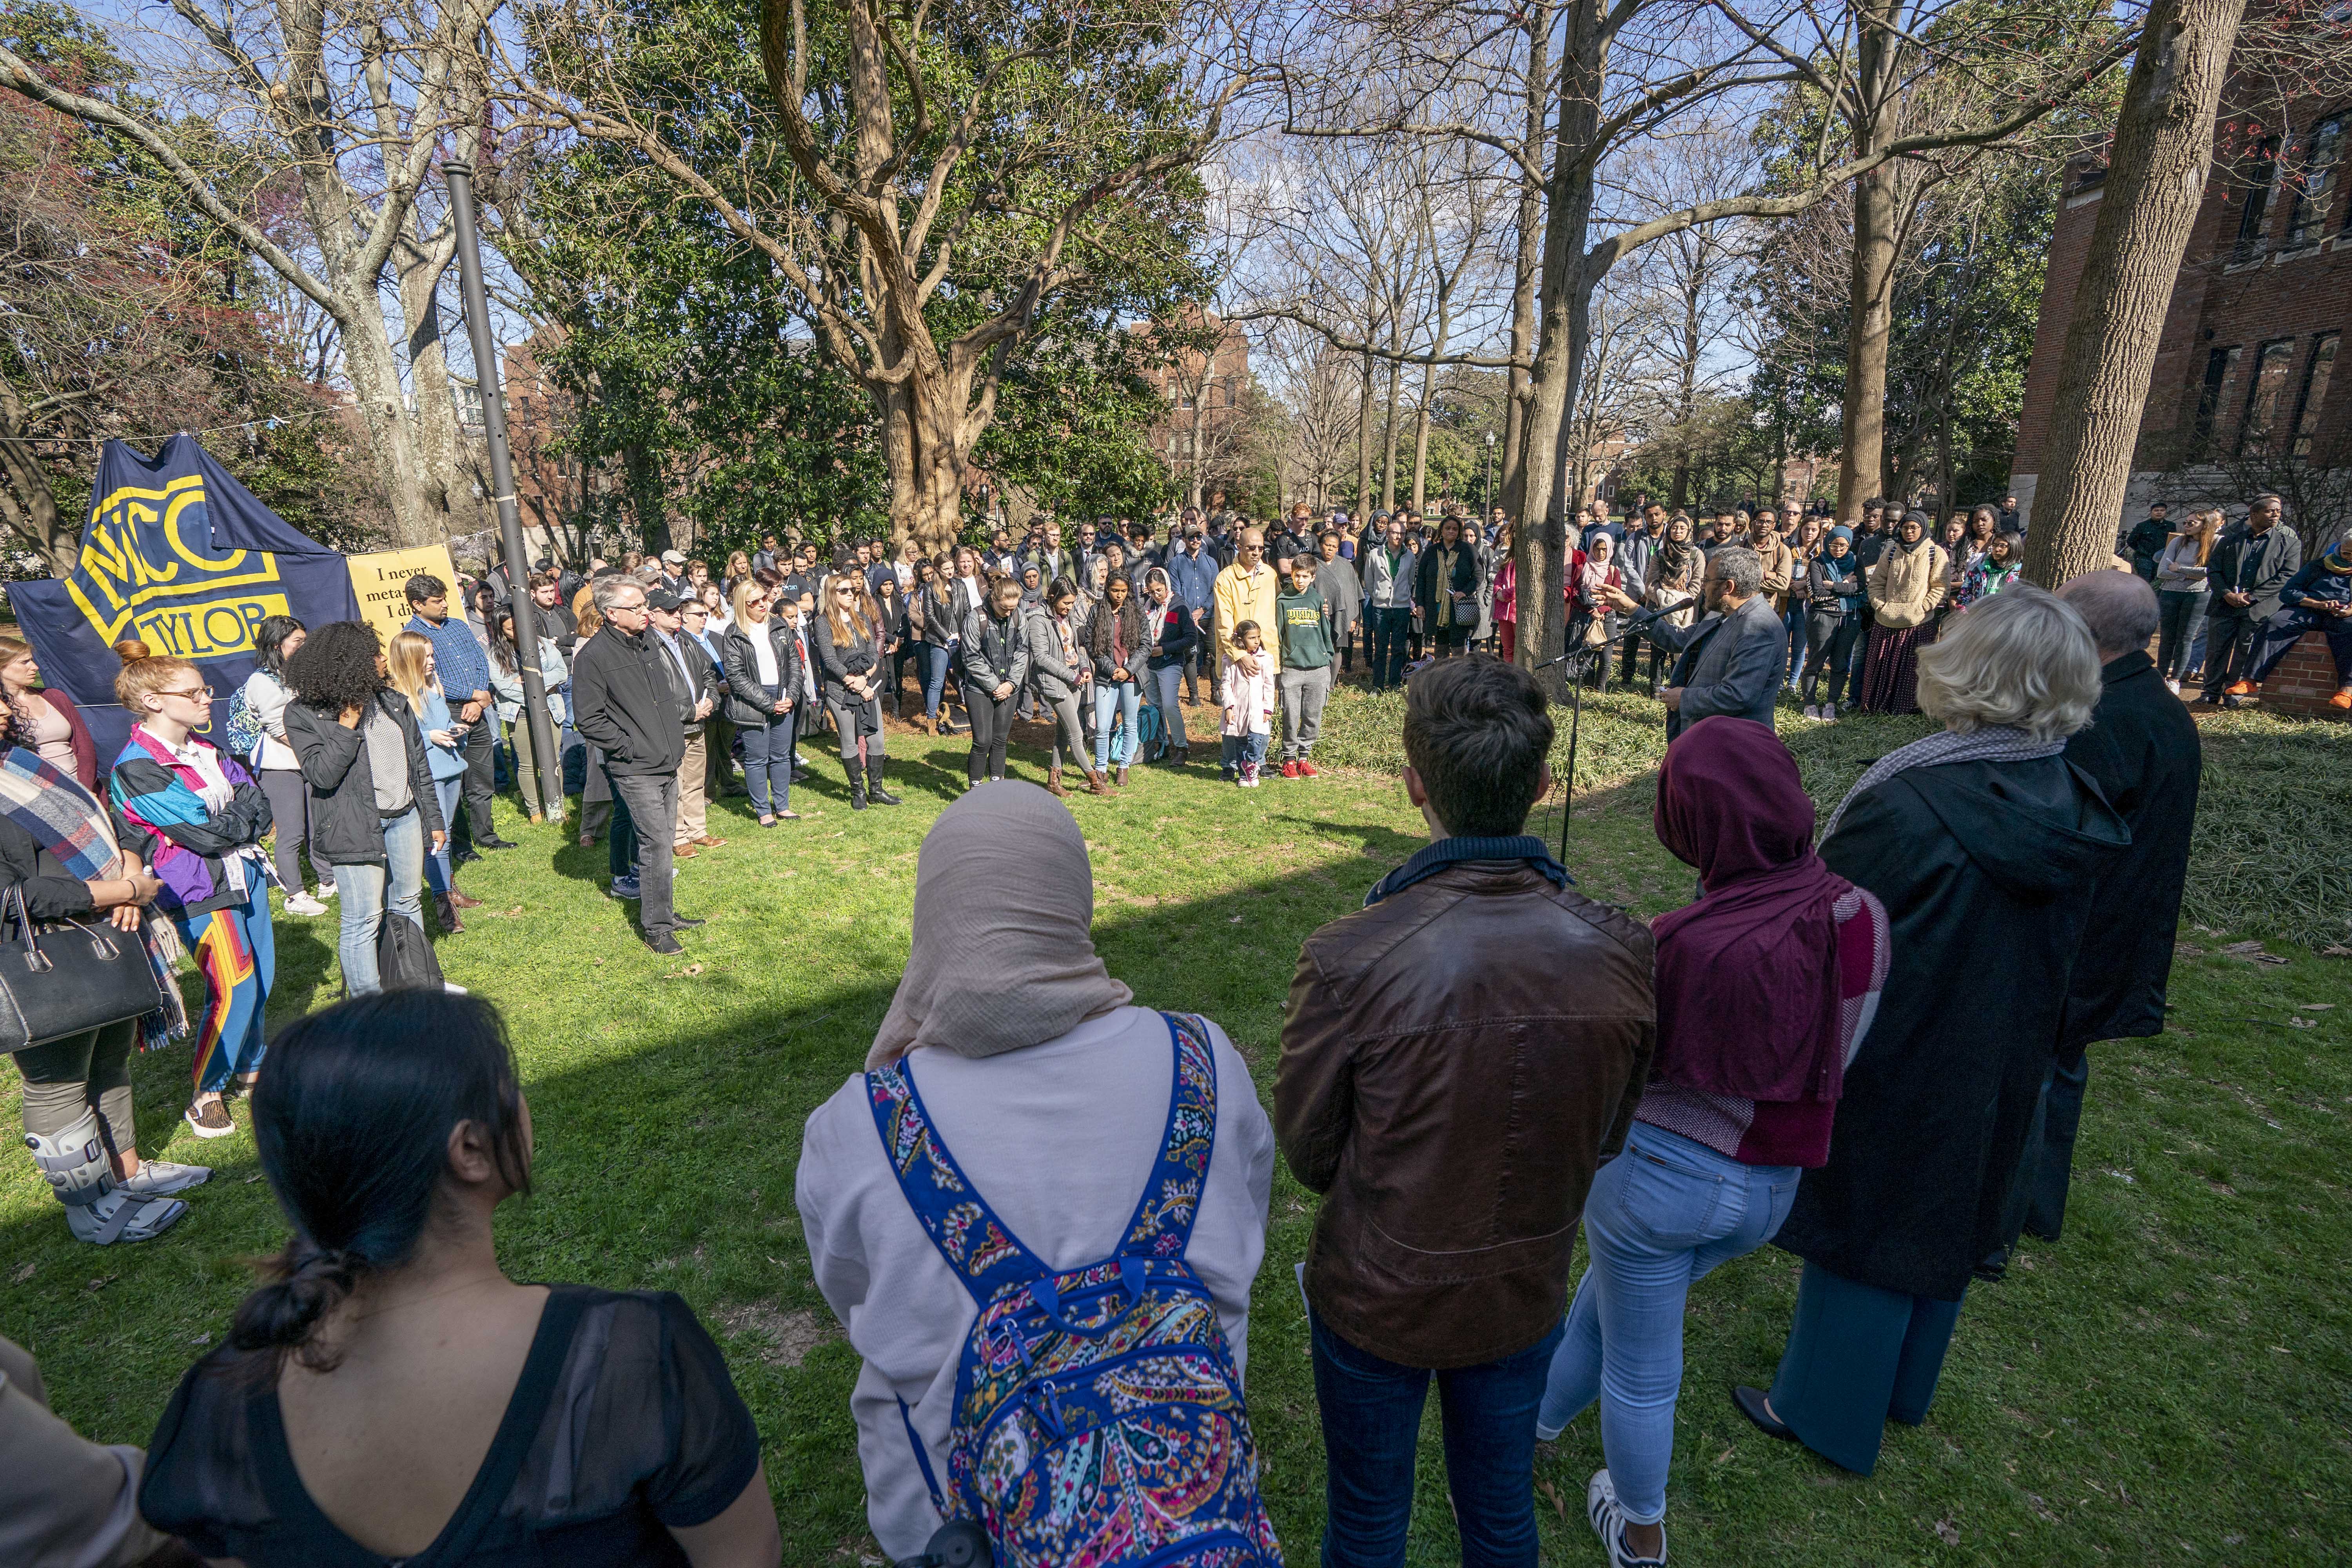 Members of the Vanderbilt community gather outside of Rand Hall to honorvictims of the terror attacks at Al Noor and Linwood mosques.